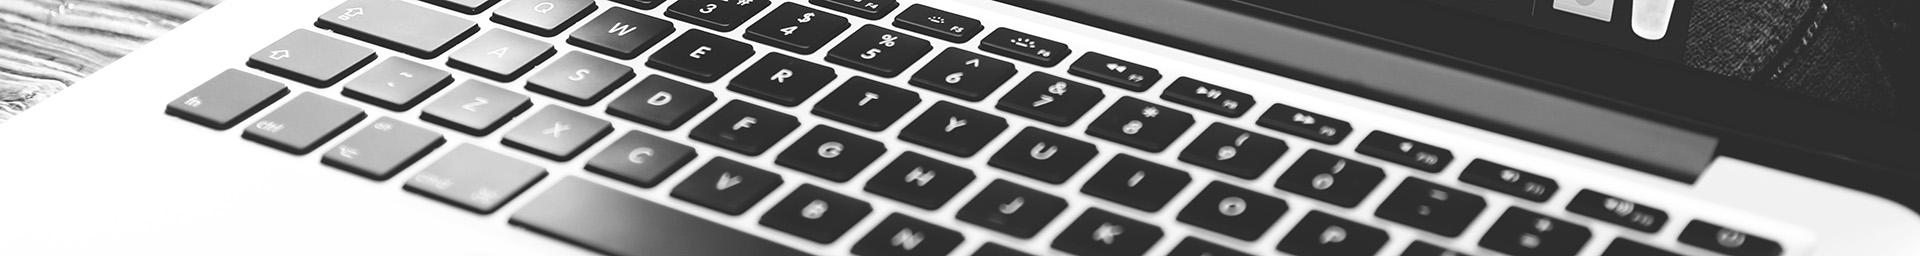 Black and white photo of the keyboard for a MacBook Pro laptop.